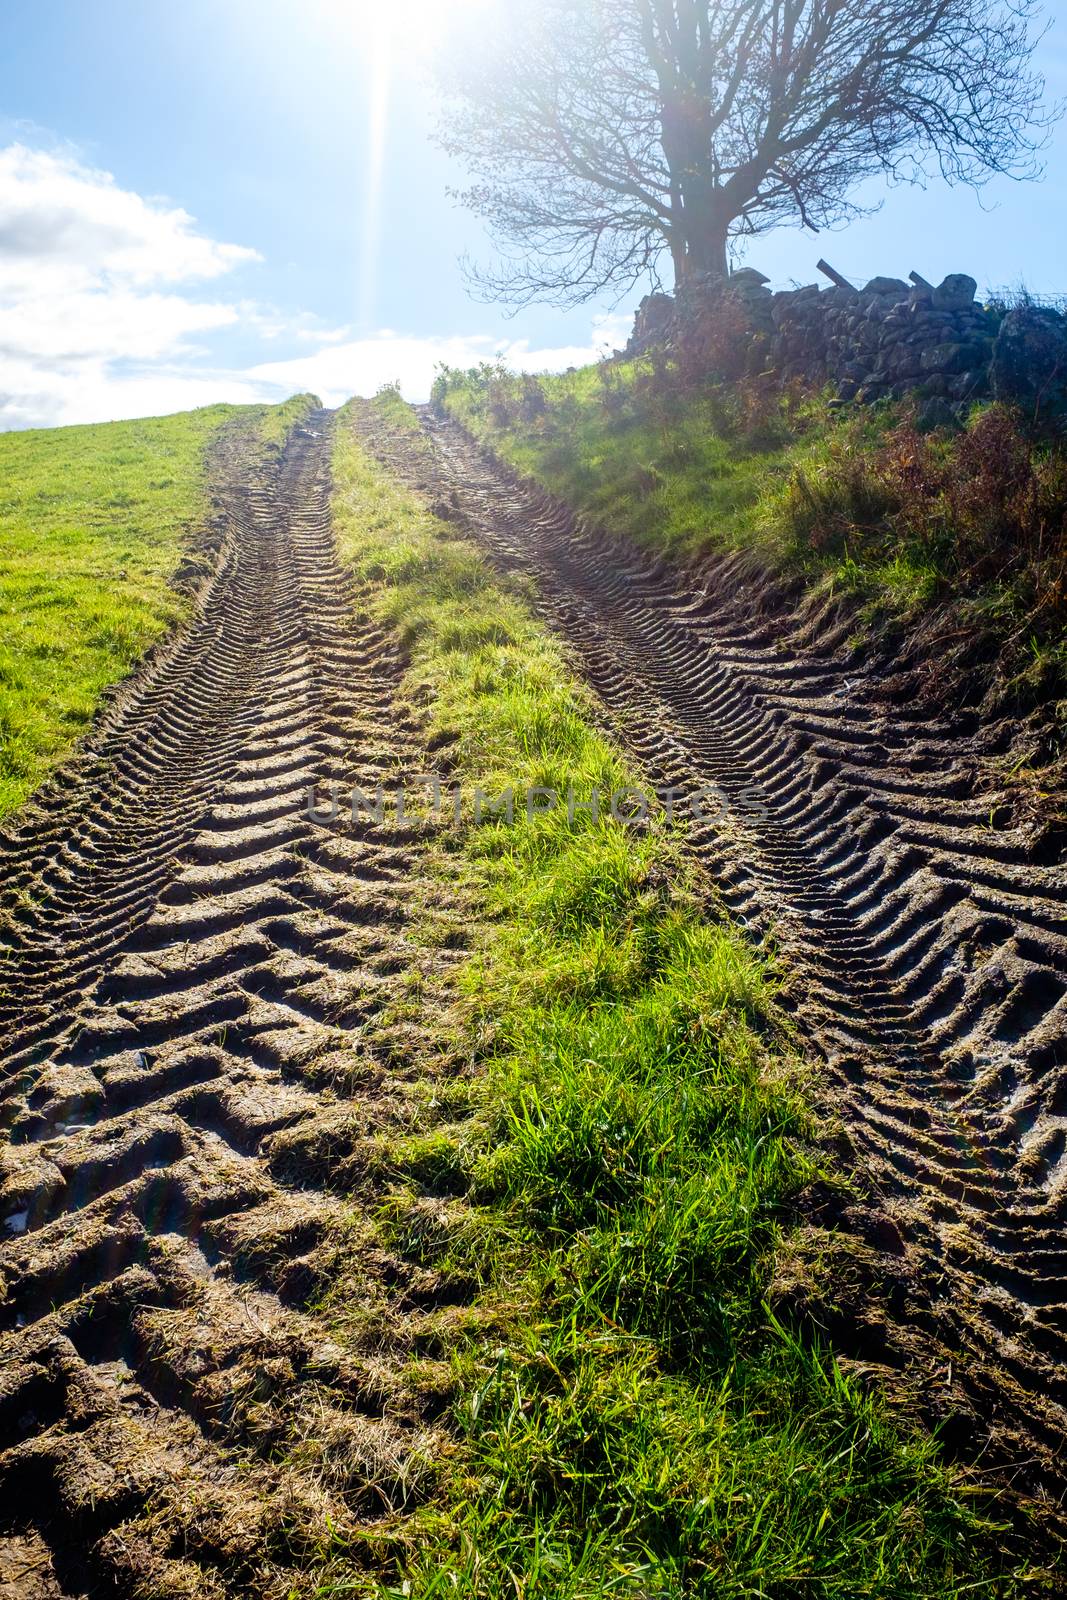 Fresh tractor track in a filed on a sunny day by paddythegolfer